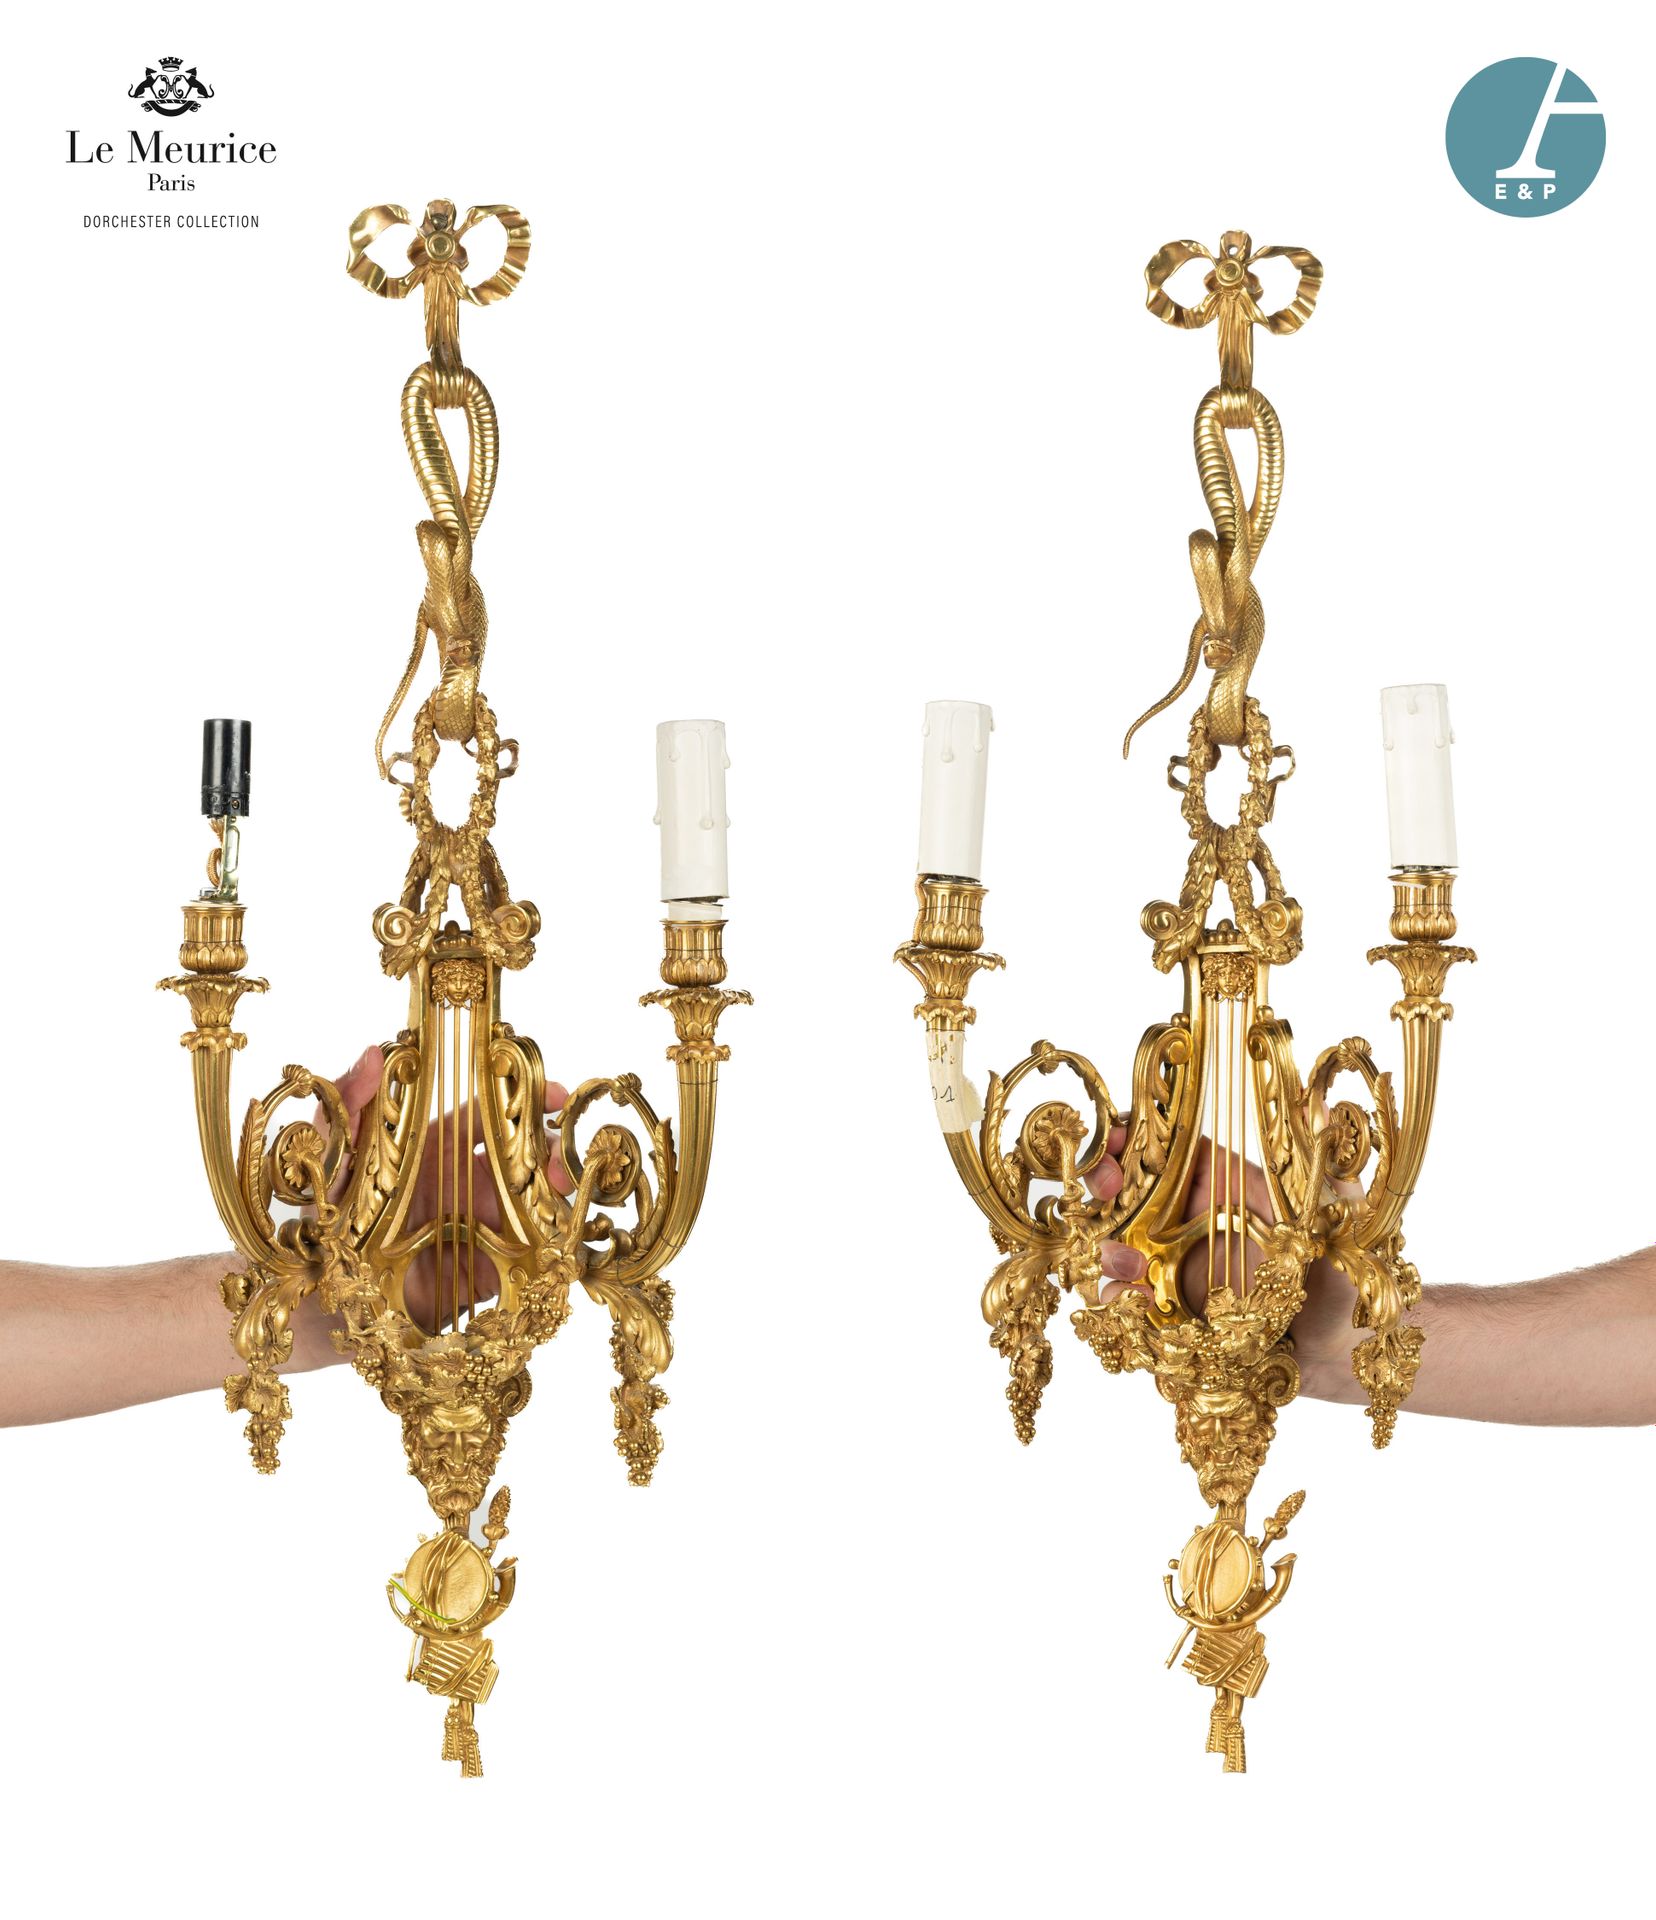 Null From the Hôtel Le Meurice.
A pair of two-light sconces in chased and gilded&hellip;